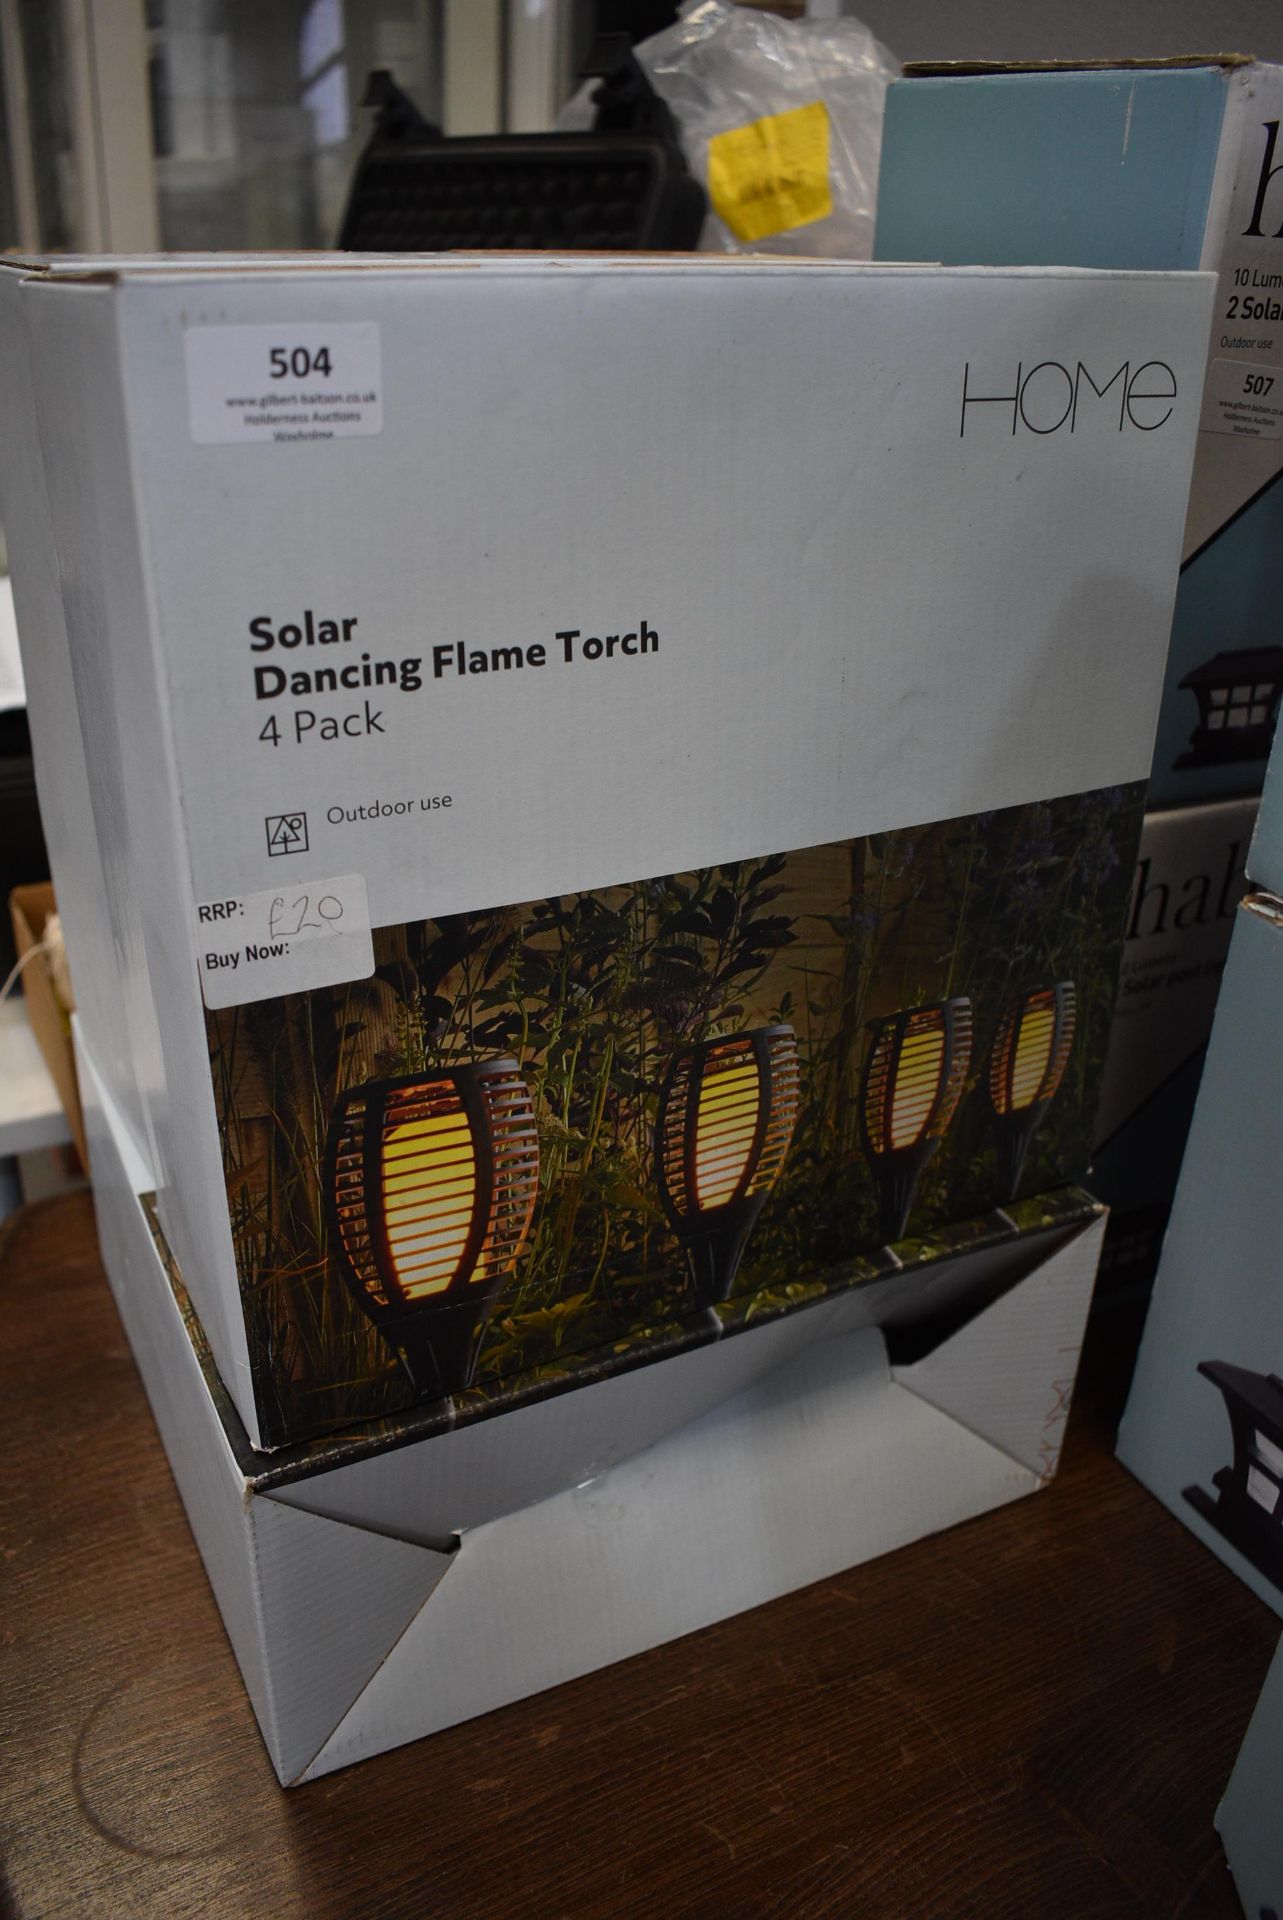 Two Boxes of Solar Dancing Flame Torches